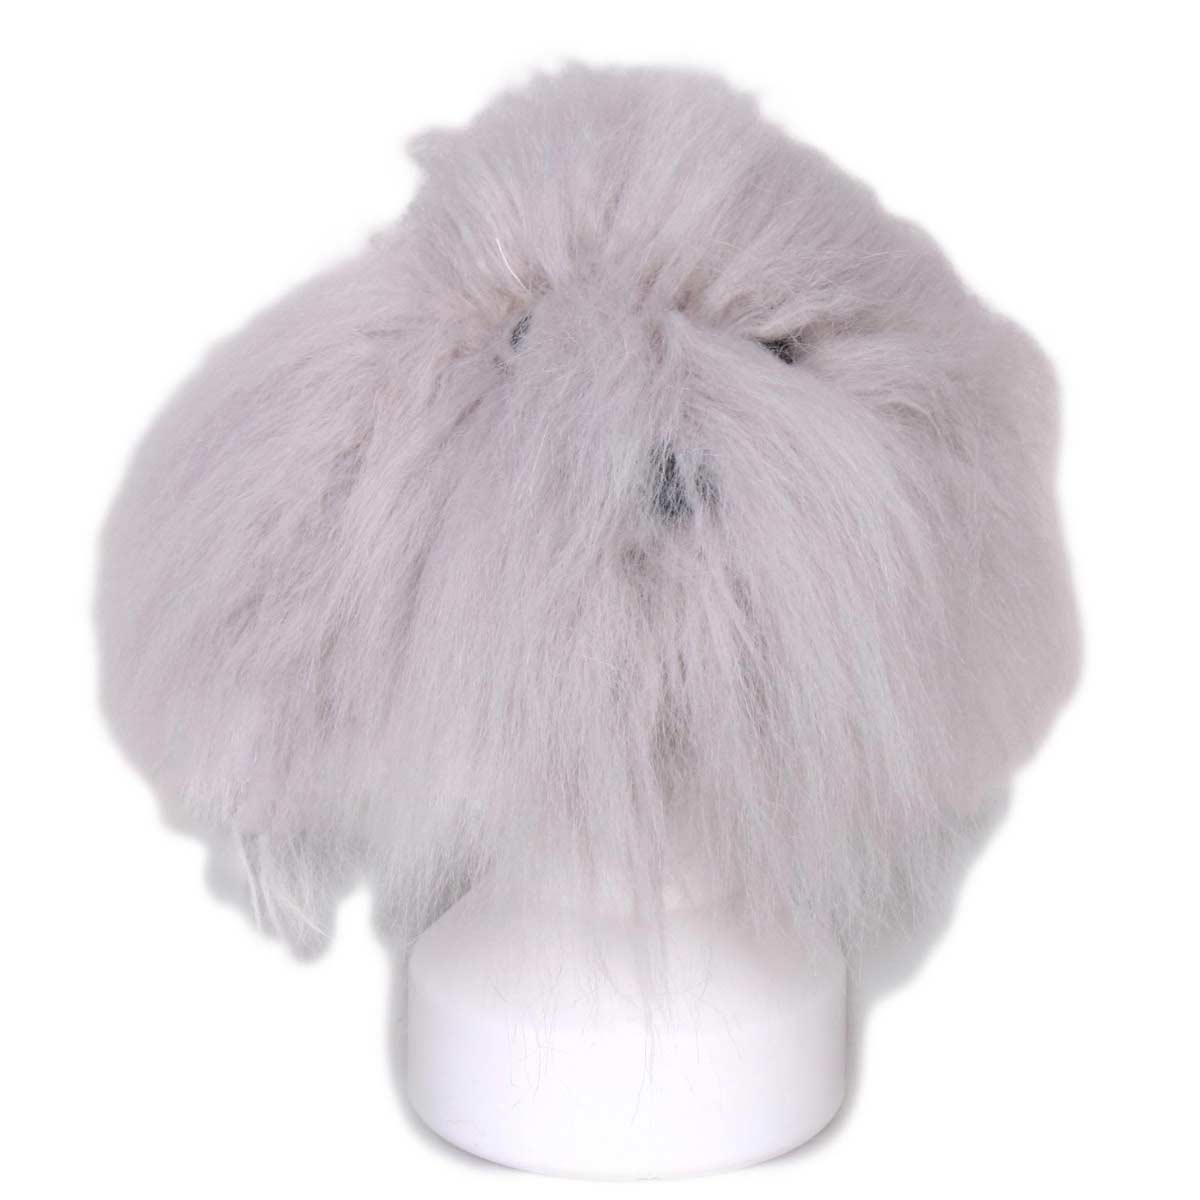 Silver grey hairpiece with white beard for practising styling dog heads